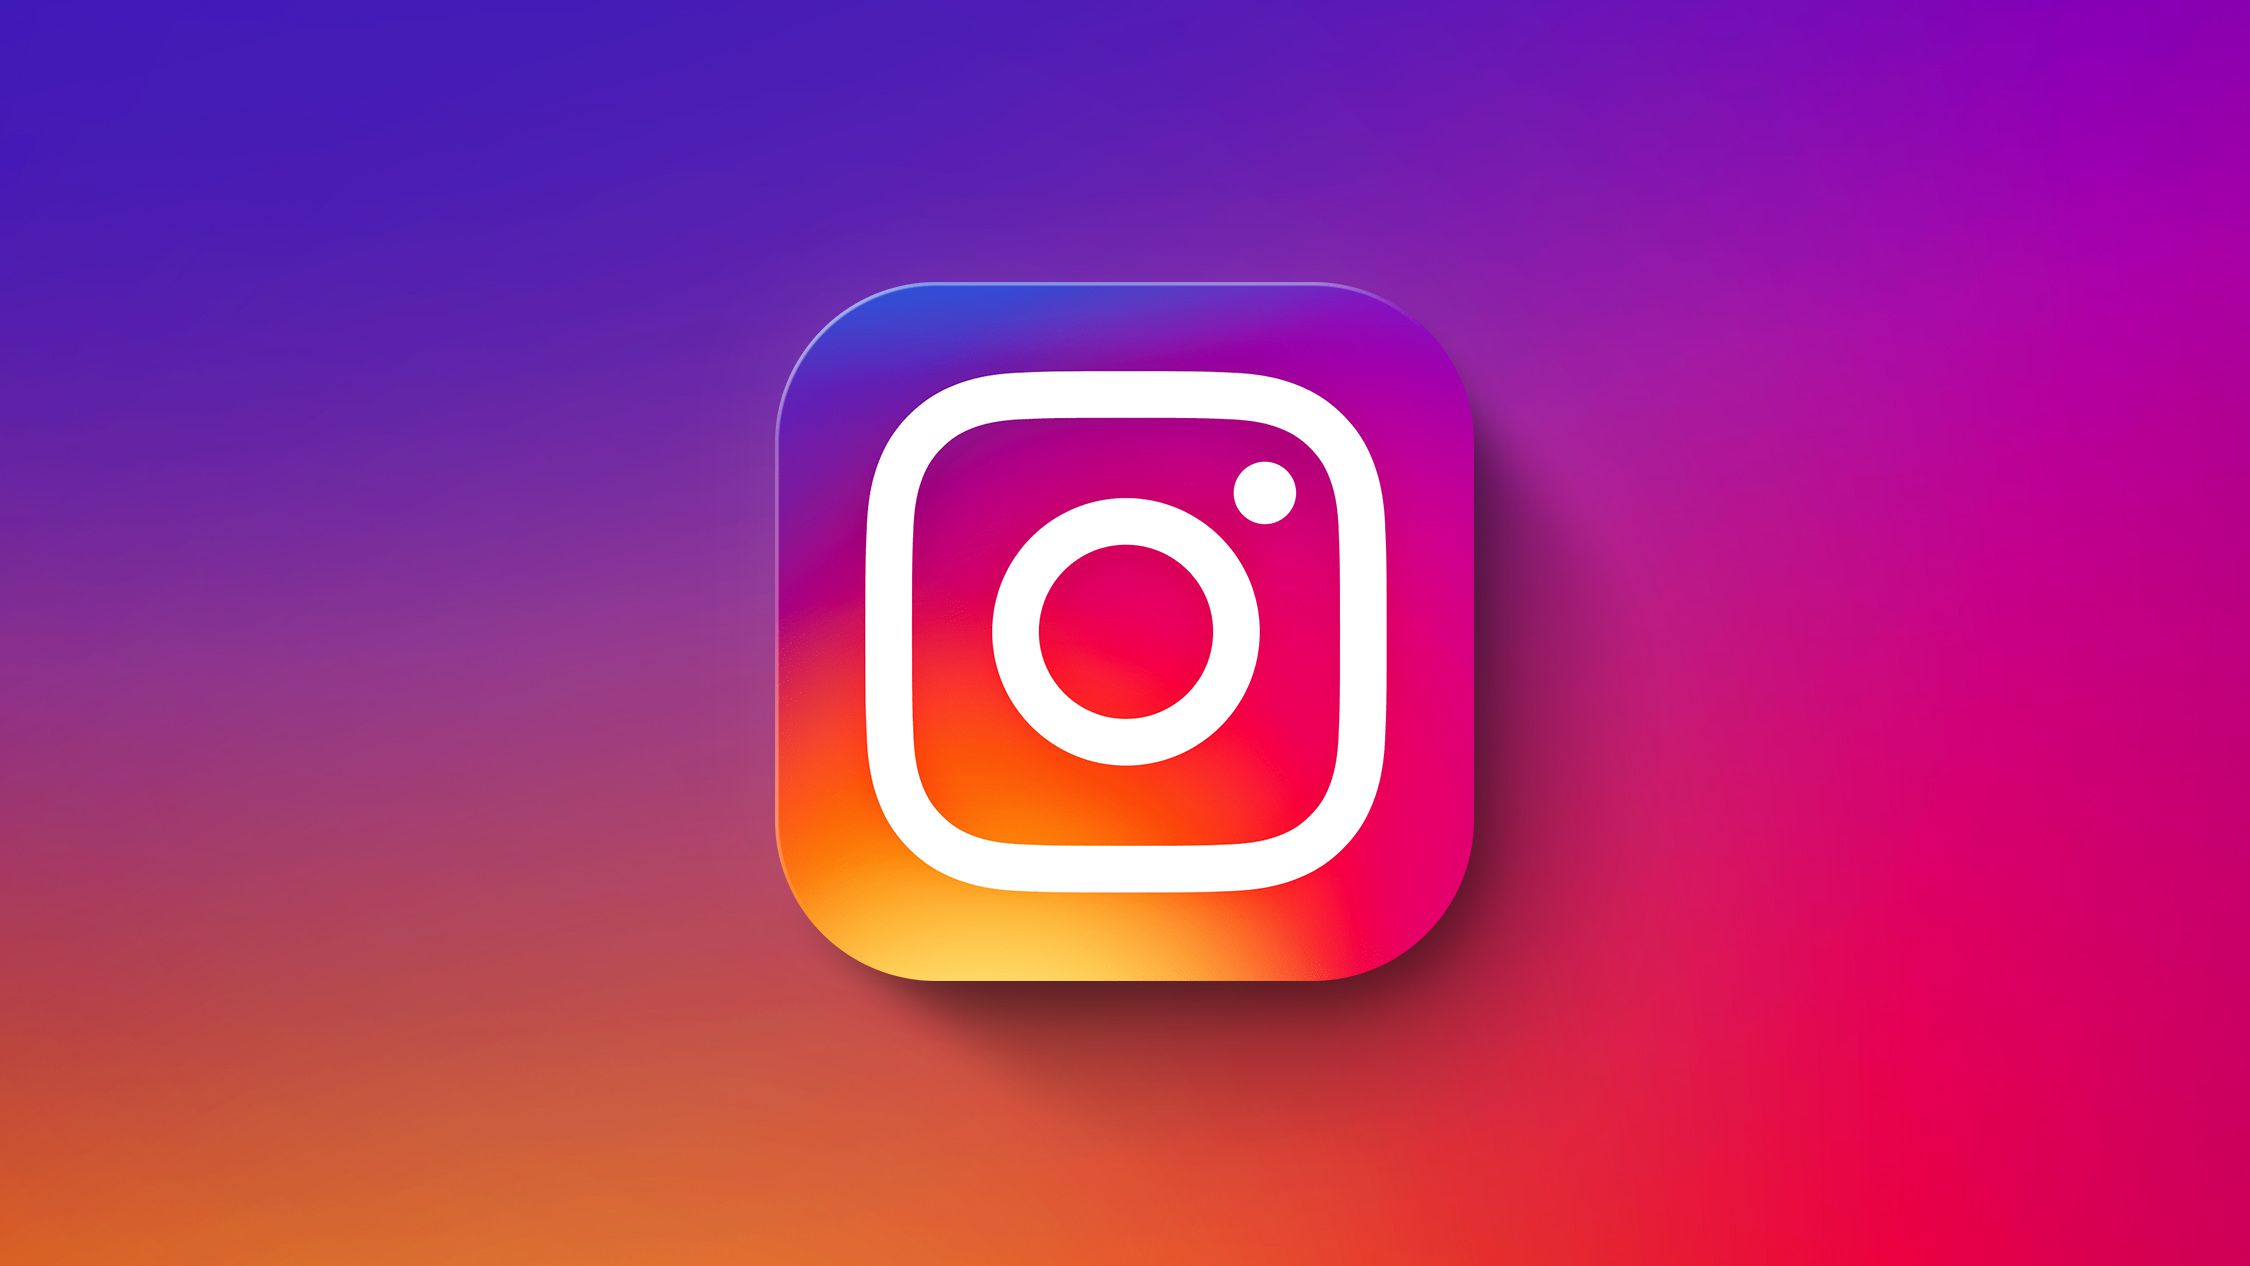 Instagram CEO Defends Shift to Video Content, Says Photo Support Will Continue - MacRumors